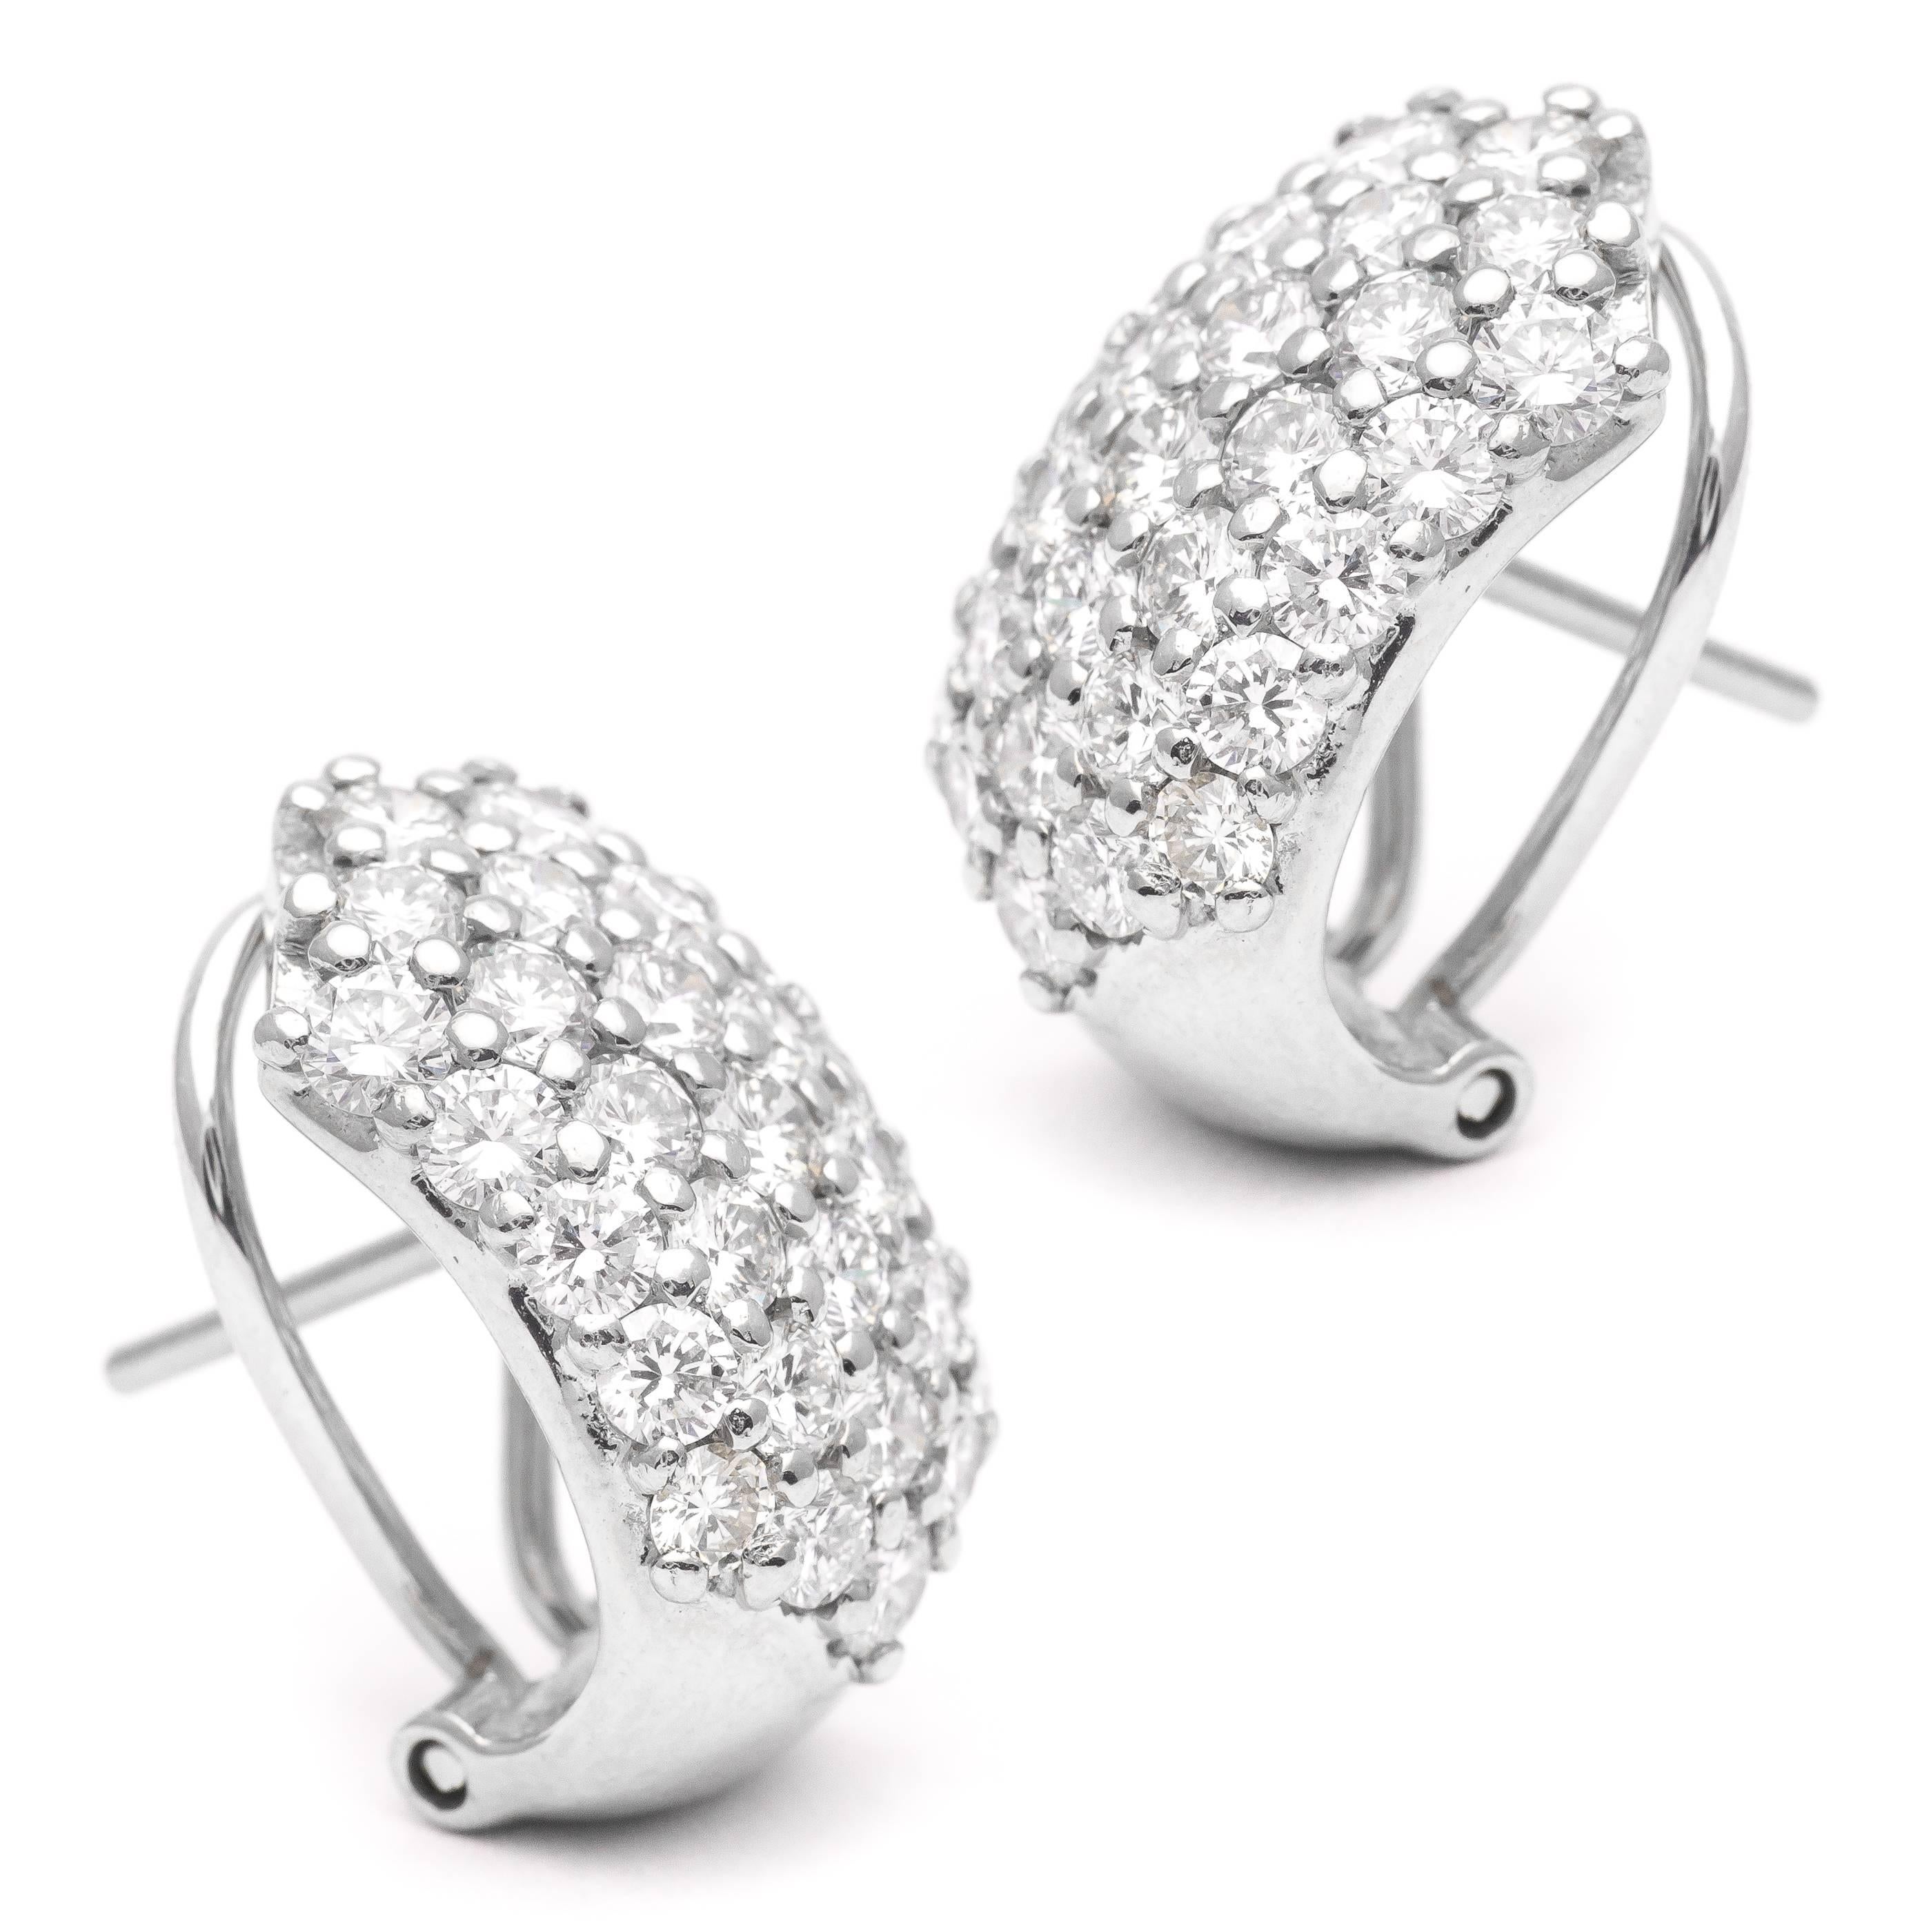 A pair of pave set diamond huggie style earrings in glistening 18 karat white gold.  Set with a total of fifty eight high quality brilliant cut diamonds, these earrings boast a total carat weight of 4.64 carats.

Grading as beautiful VS clarity and